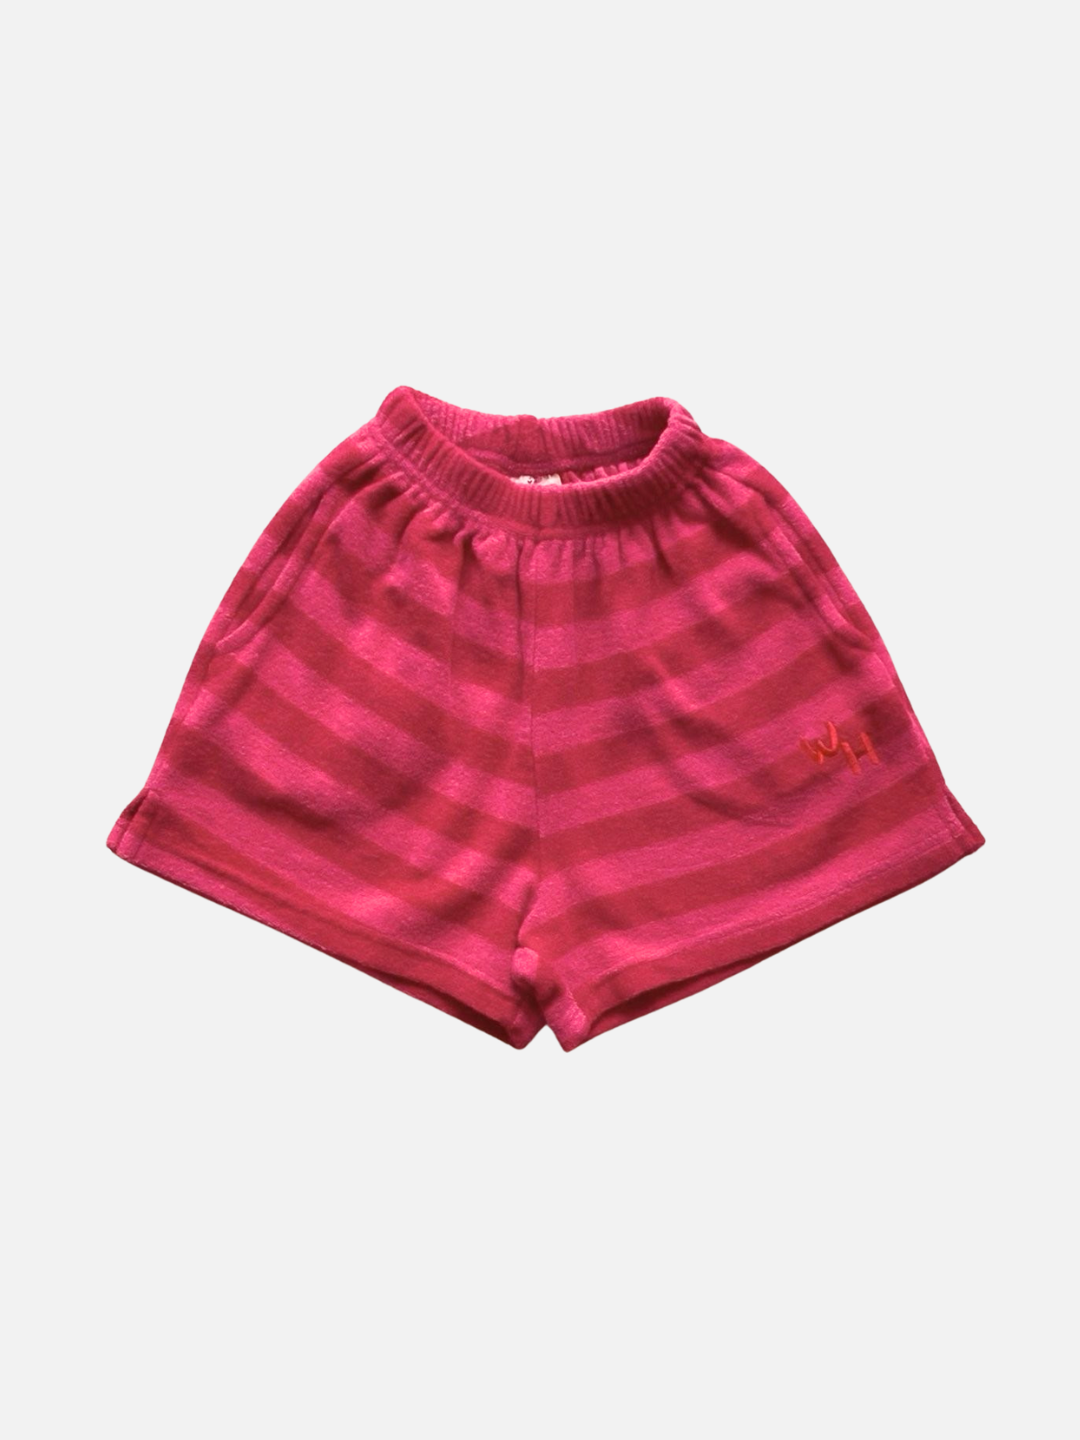 A front view of kid's Rivera Shorts in Pink/Red stripe